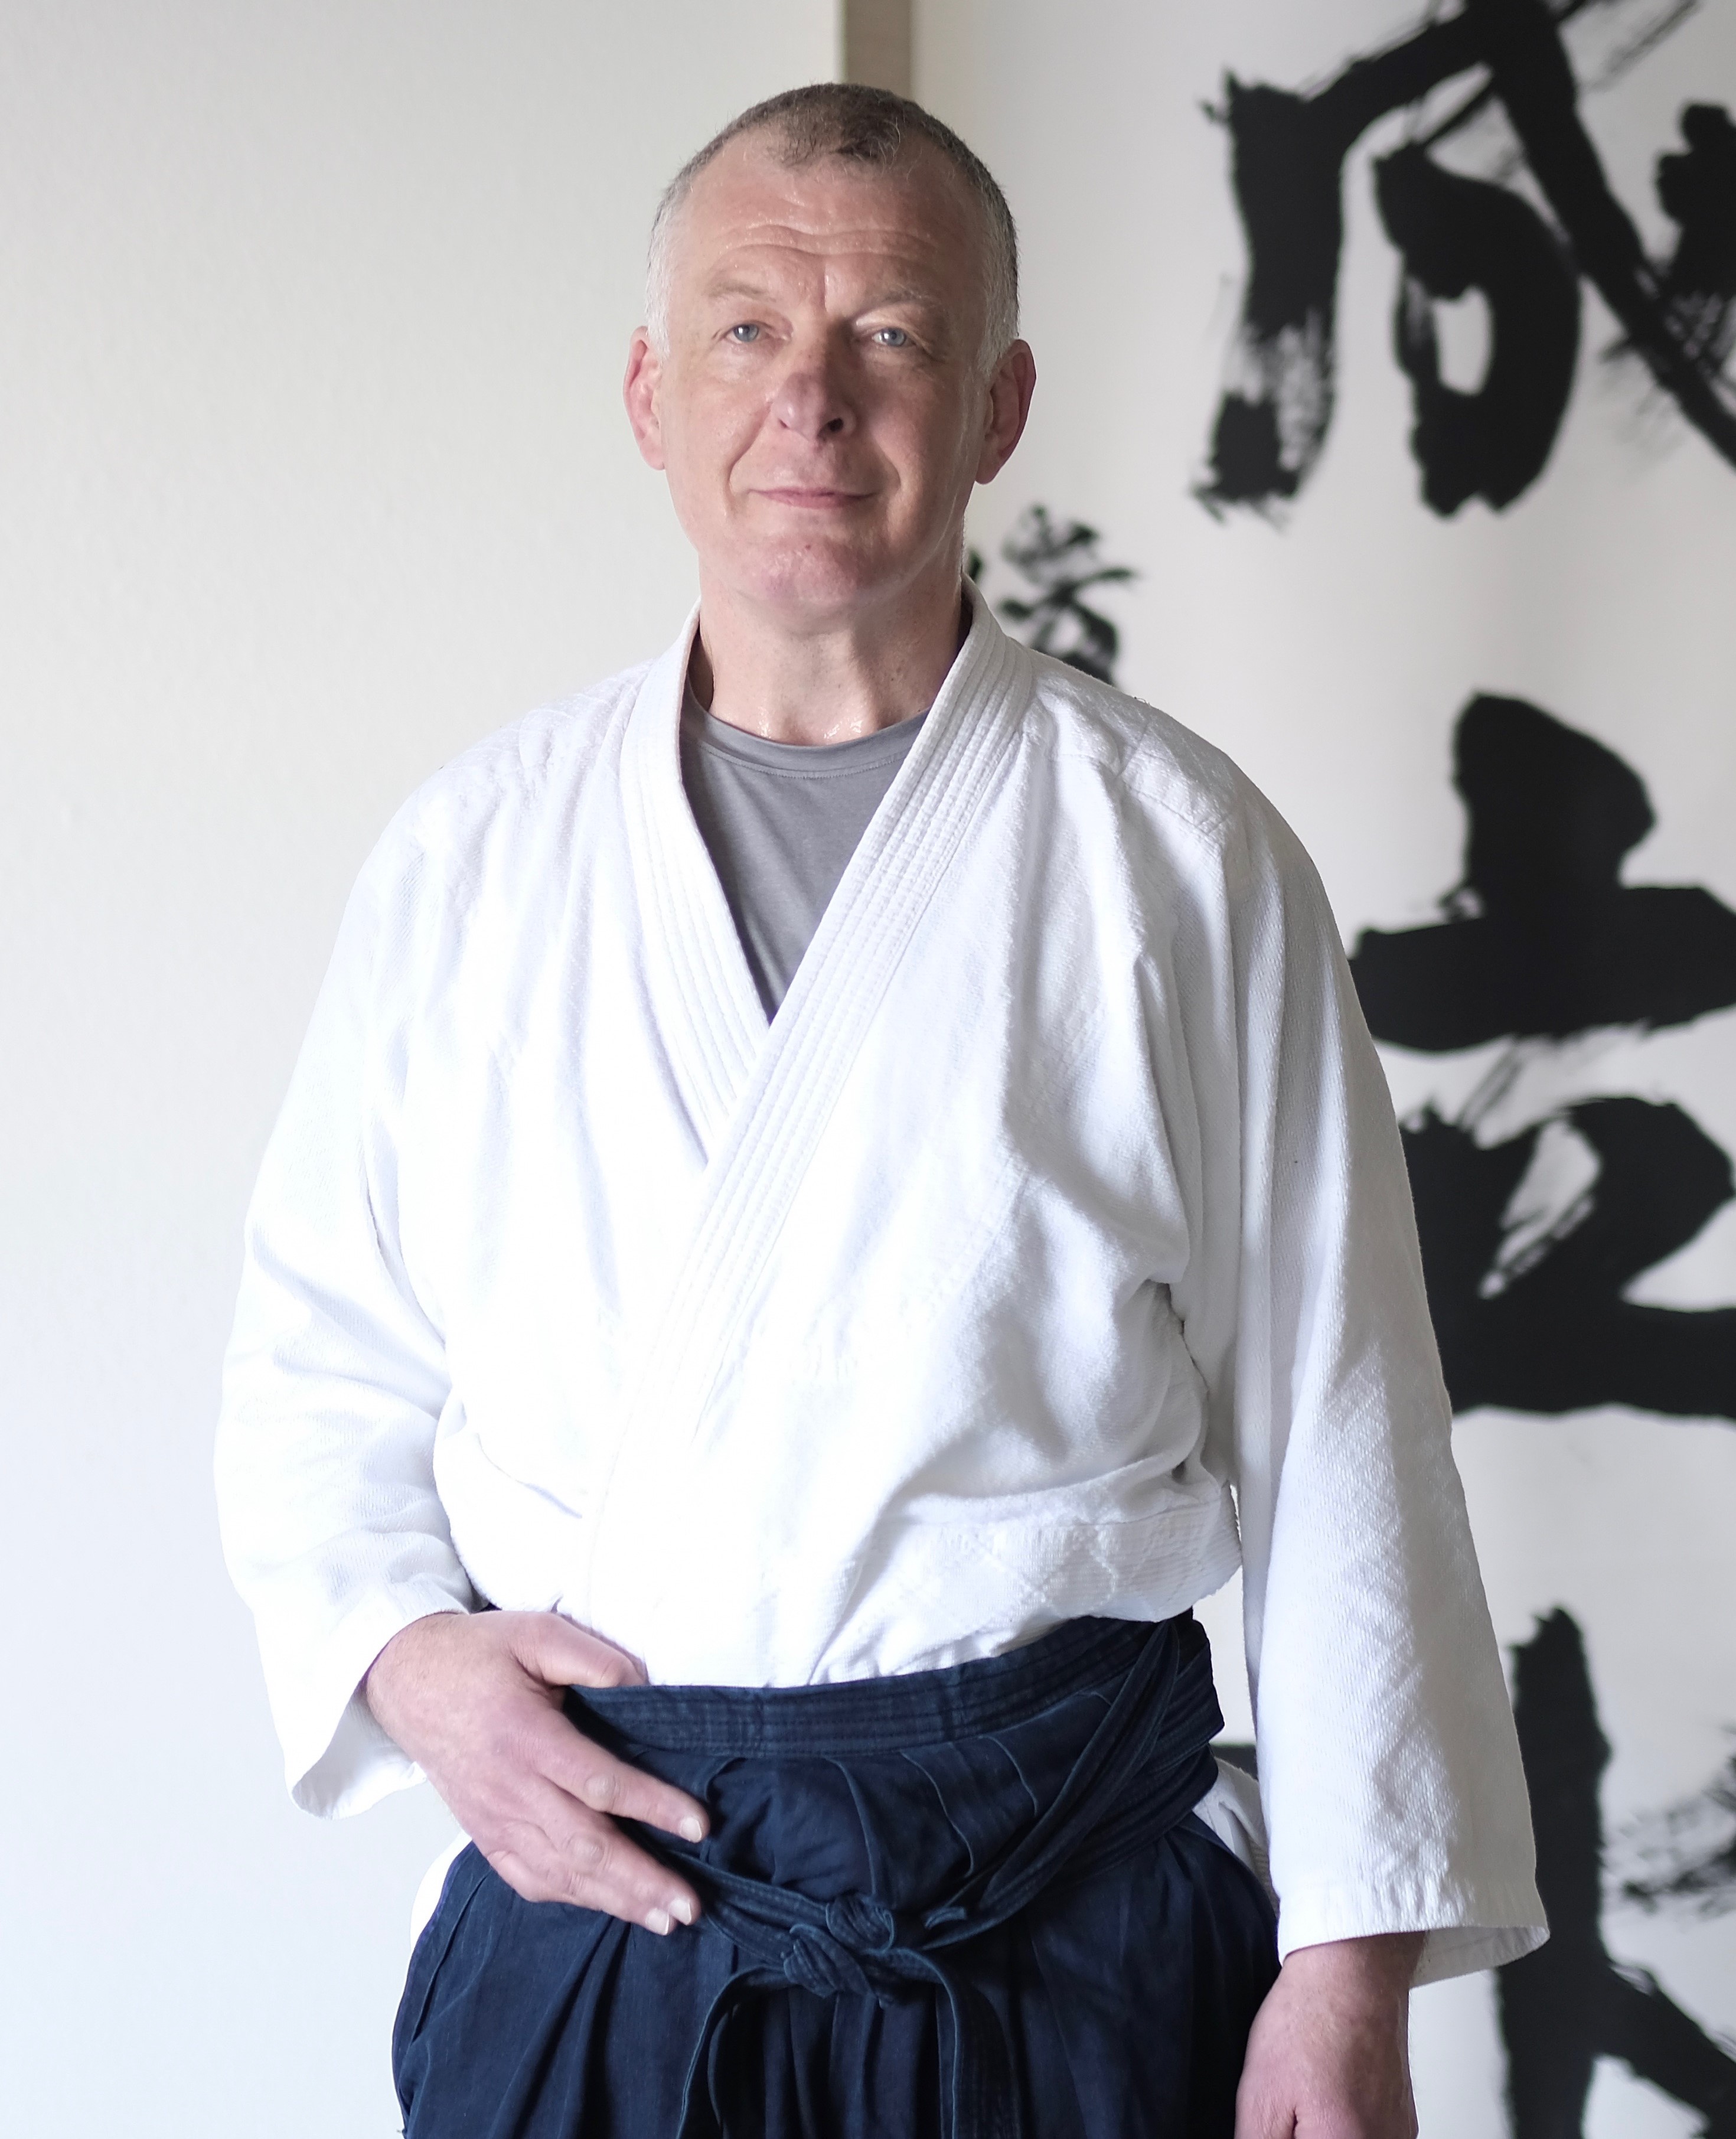 Aikido Images